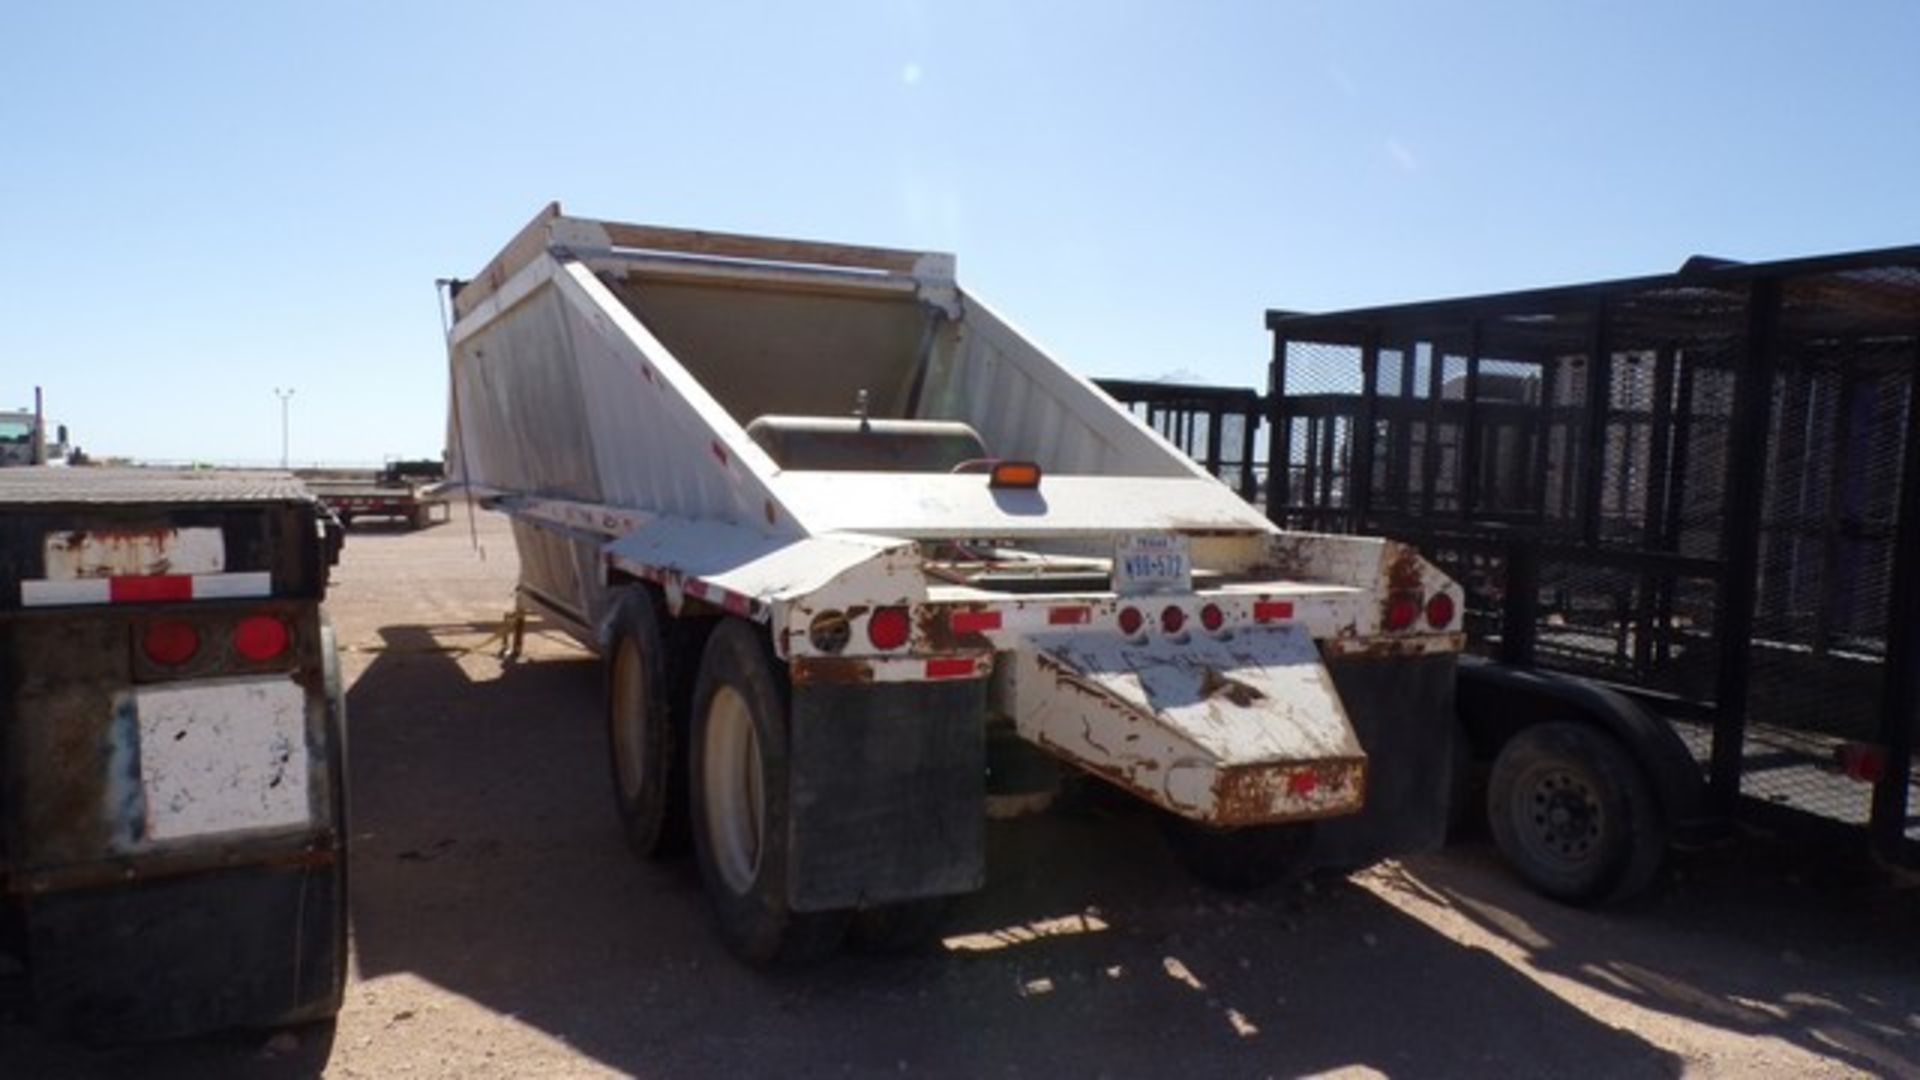 Located in YARD 1 - Midland, TX (2355) (X) 2007 CONSTRUCTION TRAILER SPECIALIST T/A BDT40 BELLY DUMP - Image 4 of 5